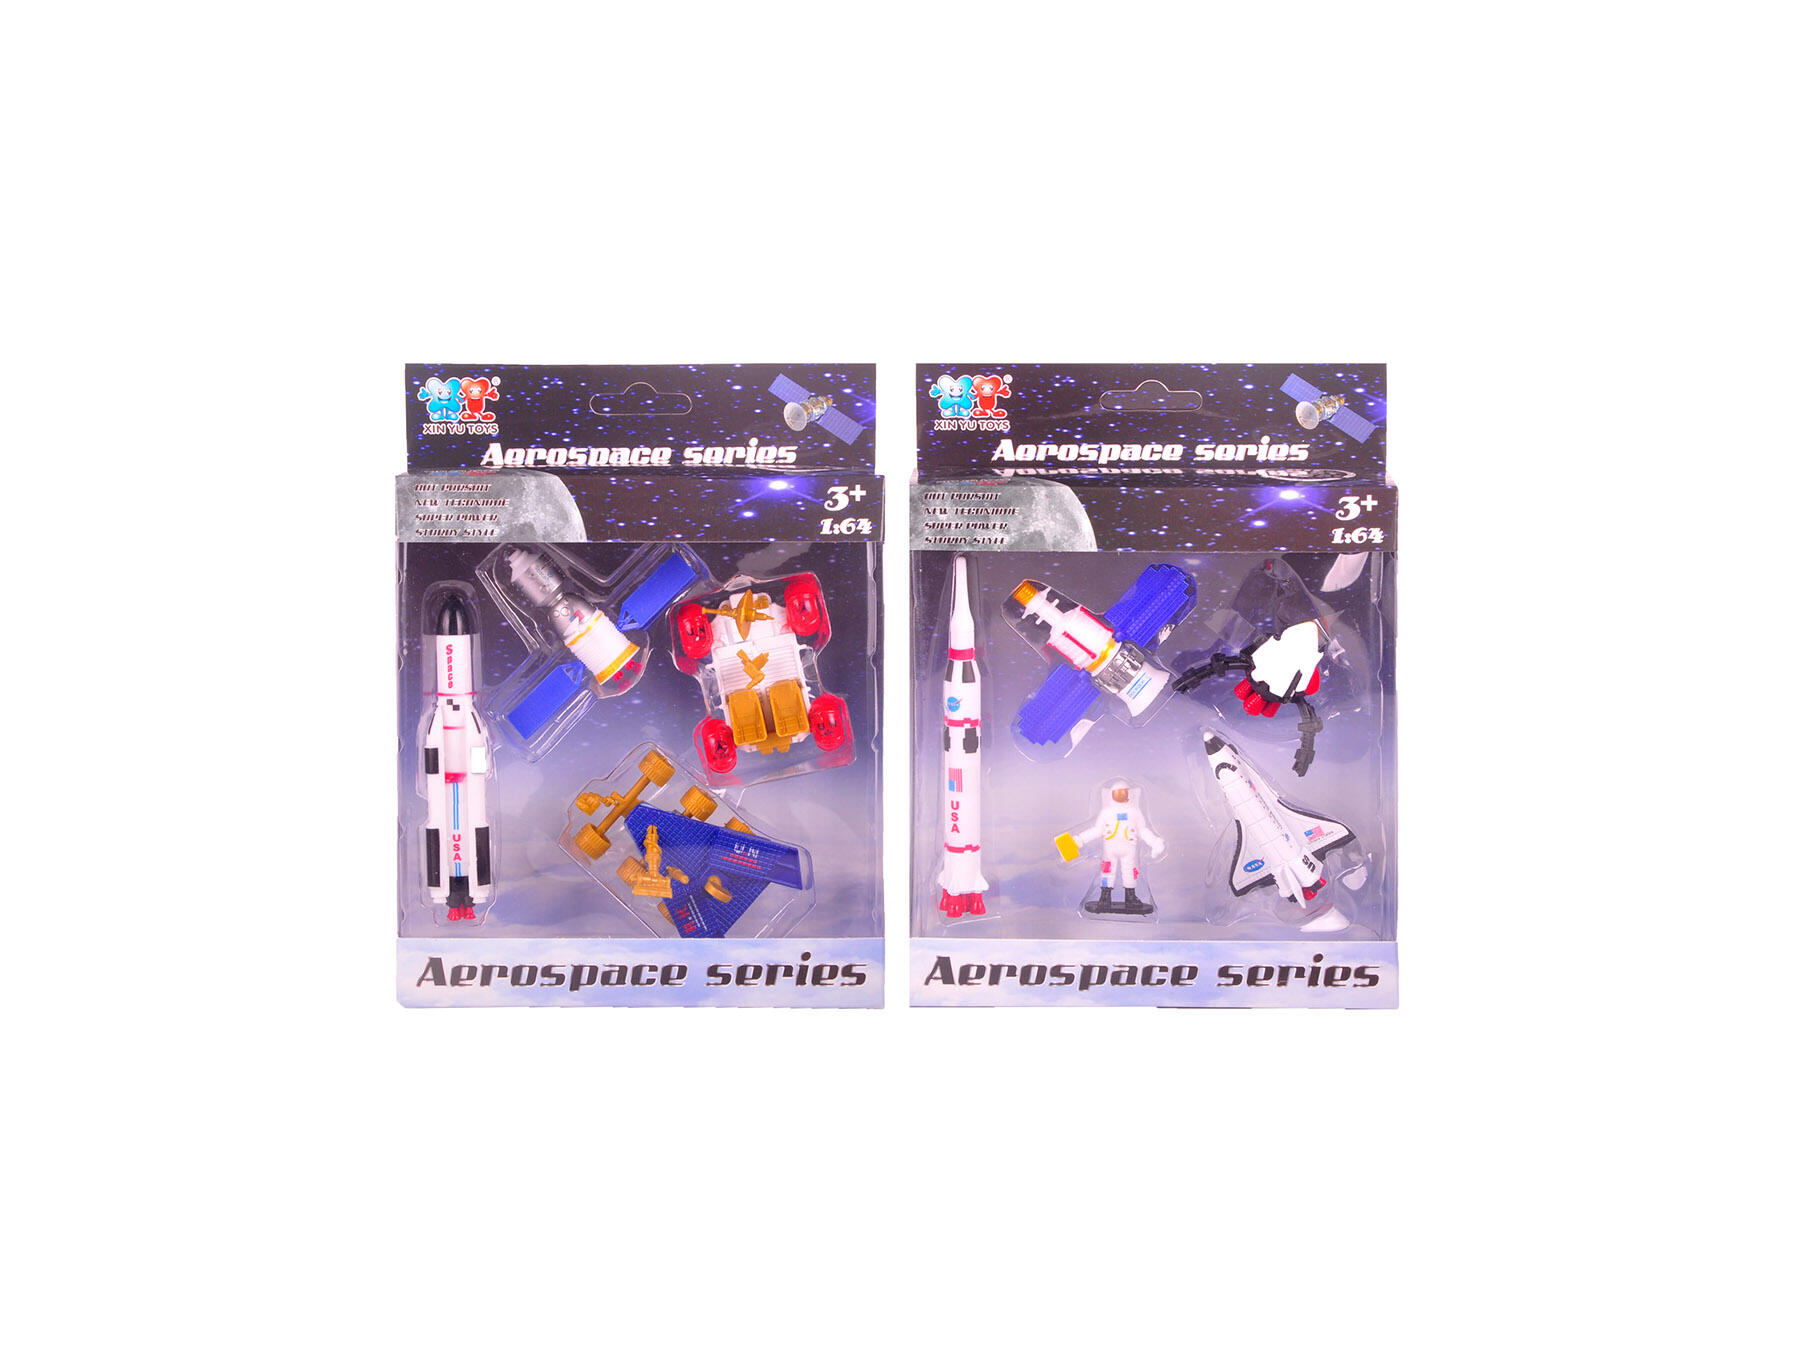 DIE-CAST OUTER SPACE PLAY SET